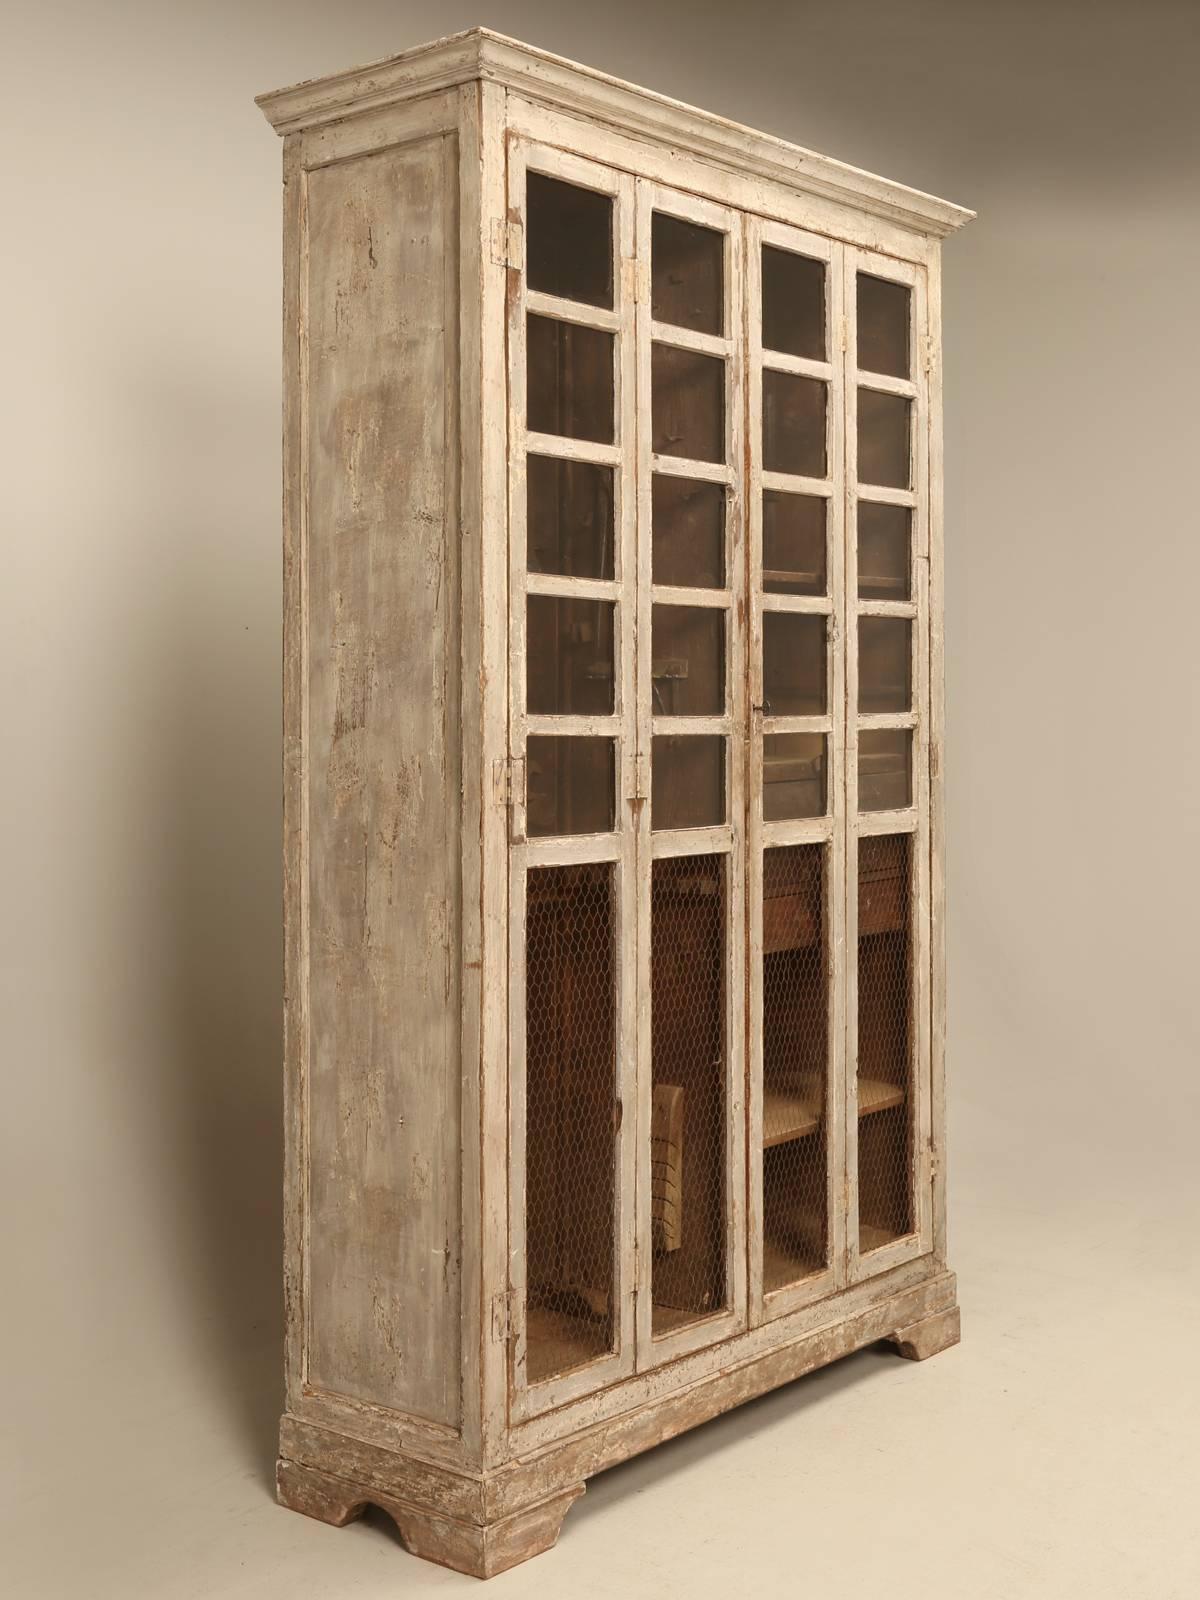 Workman’s Cabinet found in an Italian Boatyard made in the mid-1800s and in absolutely untouched original condition, even down to the carpenter’s tools. When we started in this business on a professional basis, about 25 years ago, finding “real”